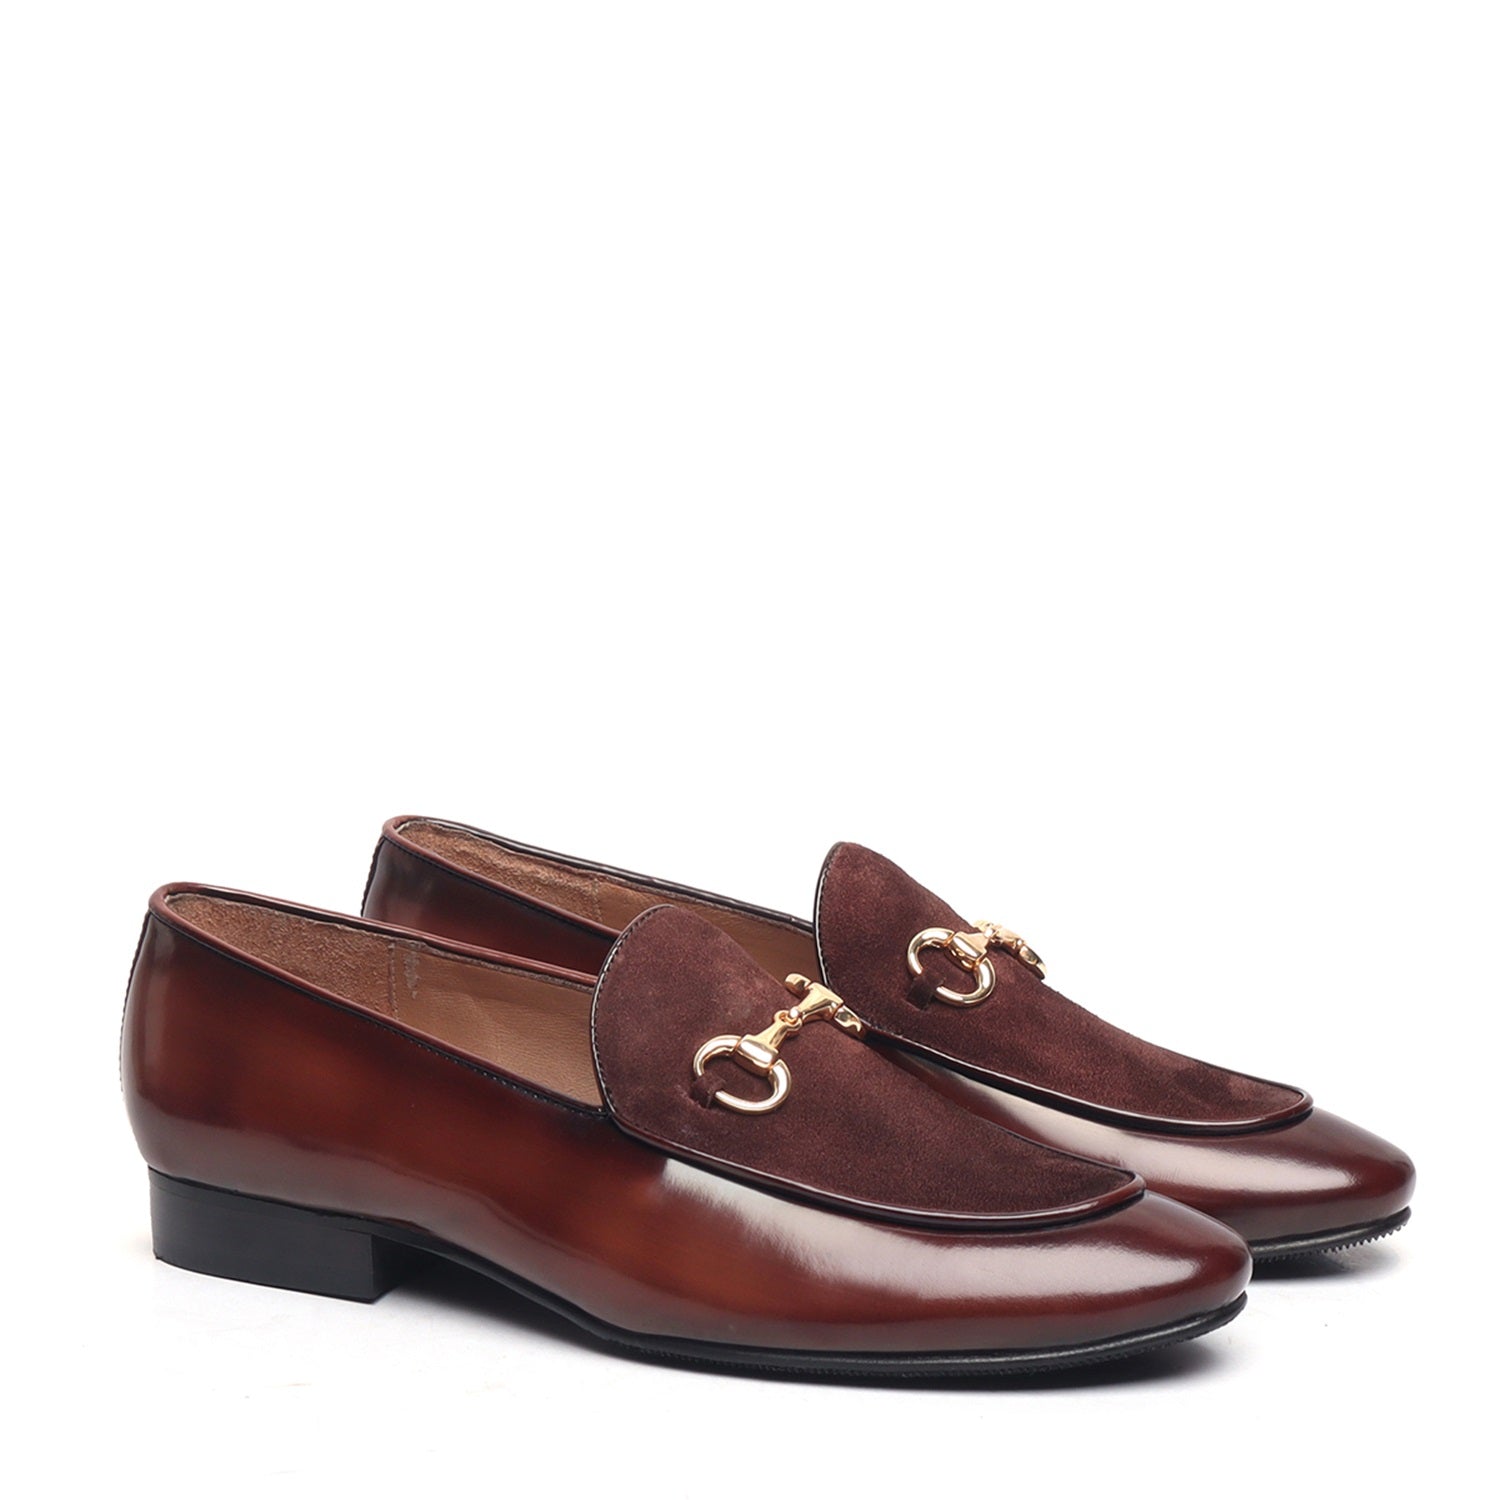 Brown Patent Design Horse-bit Contrasting Suede Leather Loafers by Brune & Bareskin